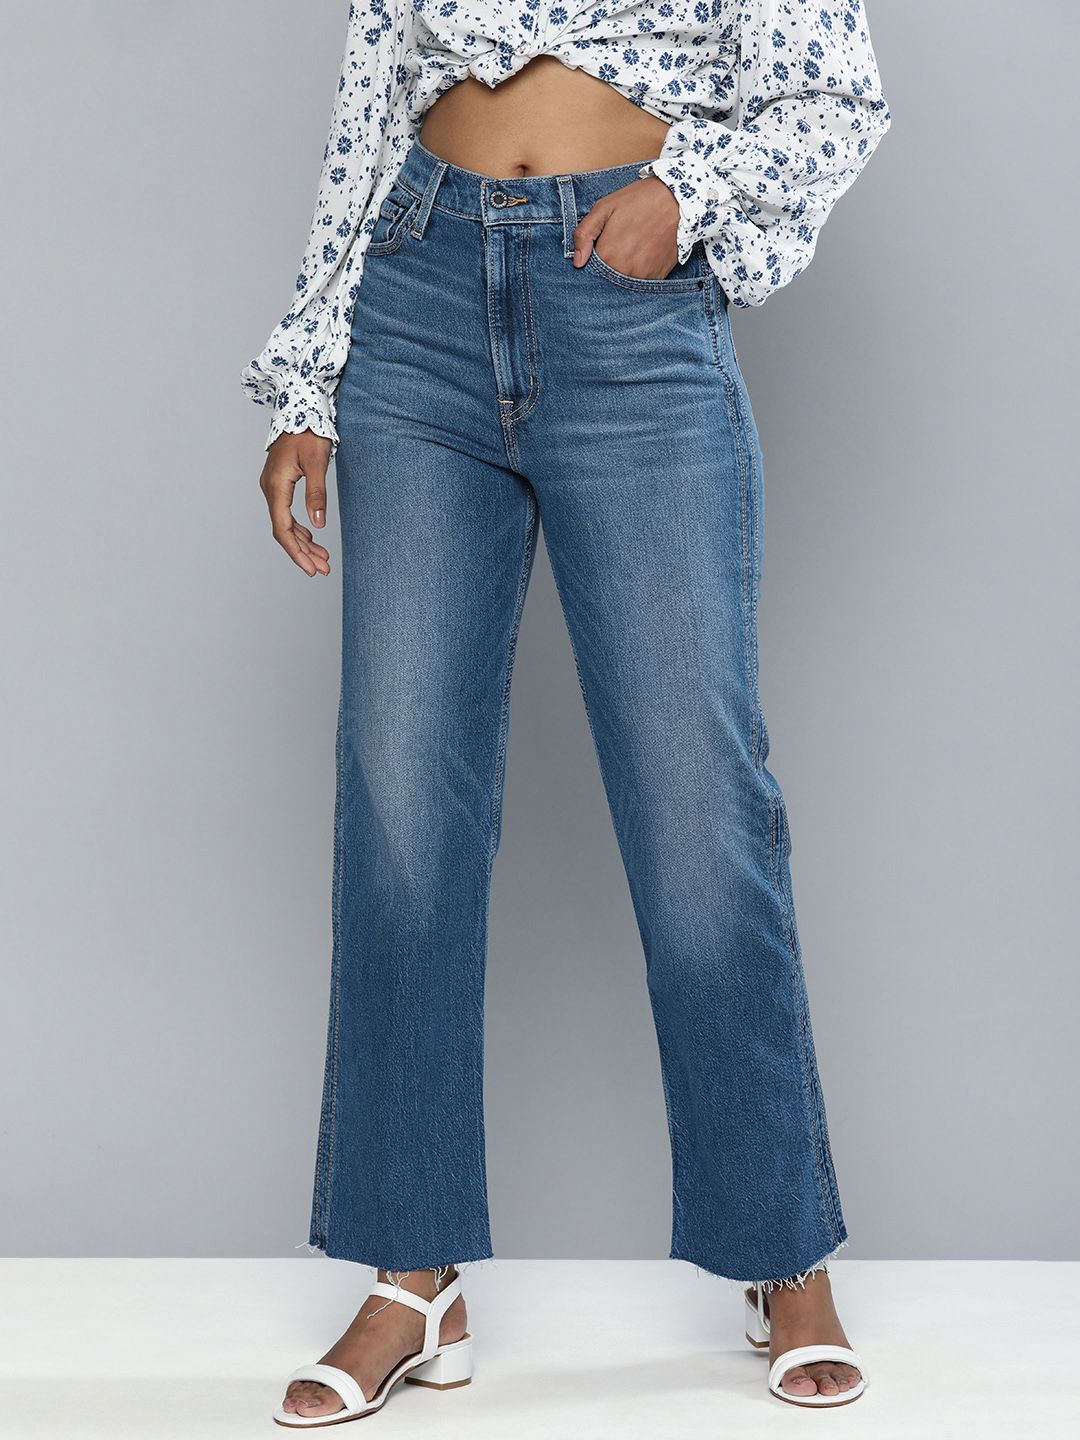 Levis X Deepika Padukone Women Blue Straight Fit High-Rise Light Fade Stretchable Jeans Price in India